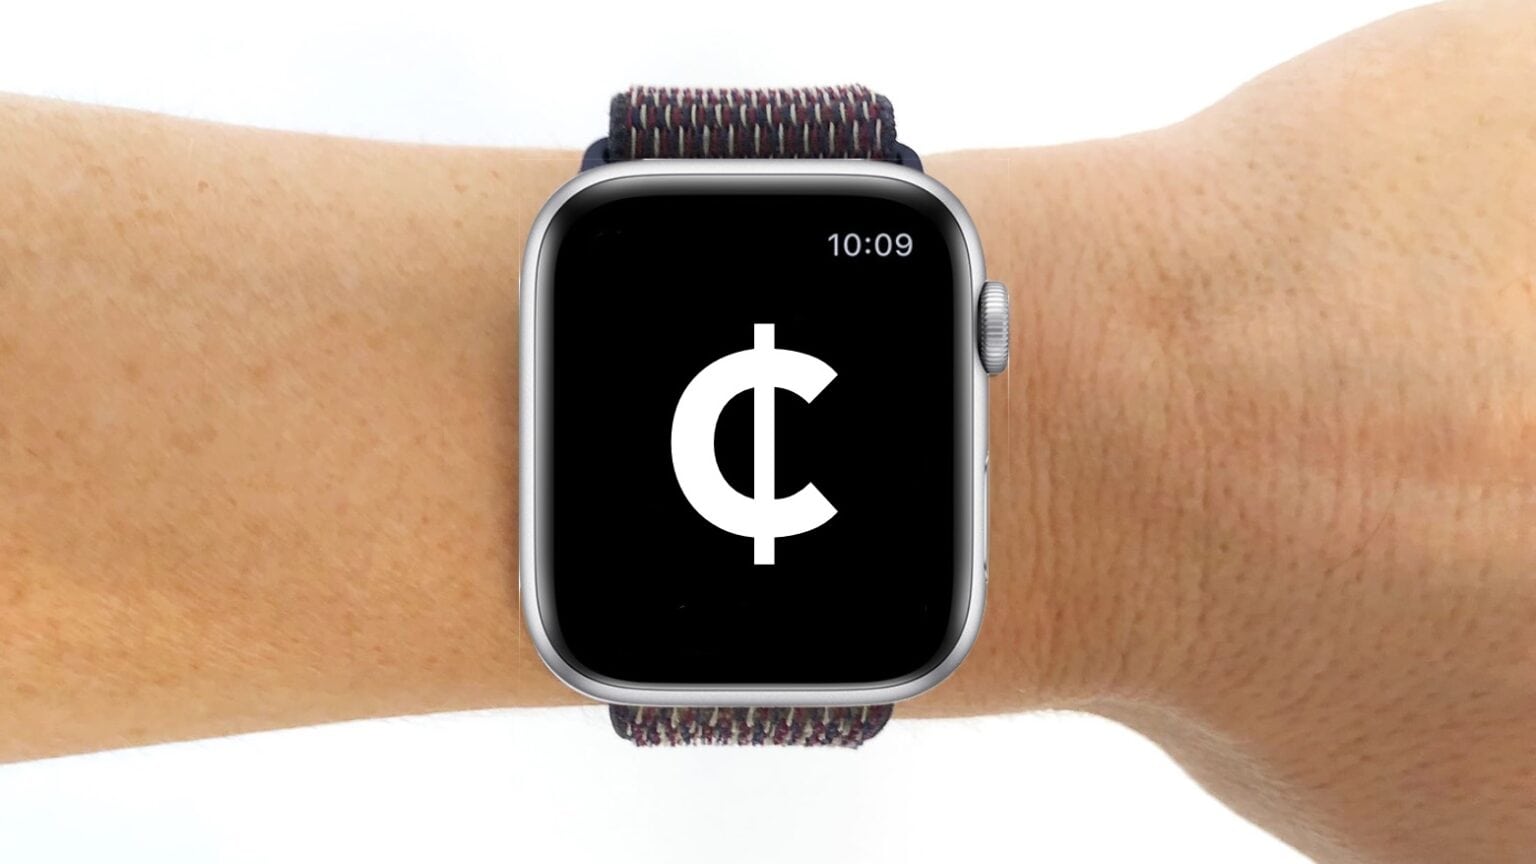 More affordable Apple Watch would be nice.